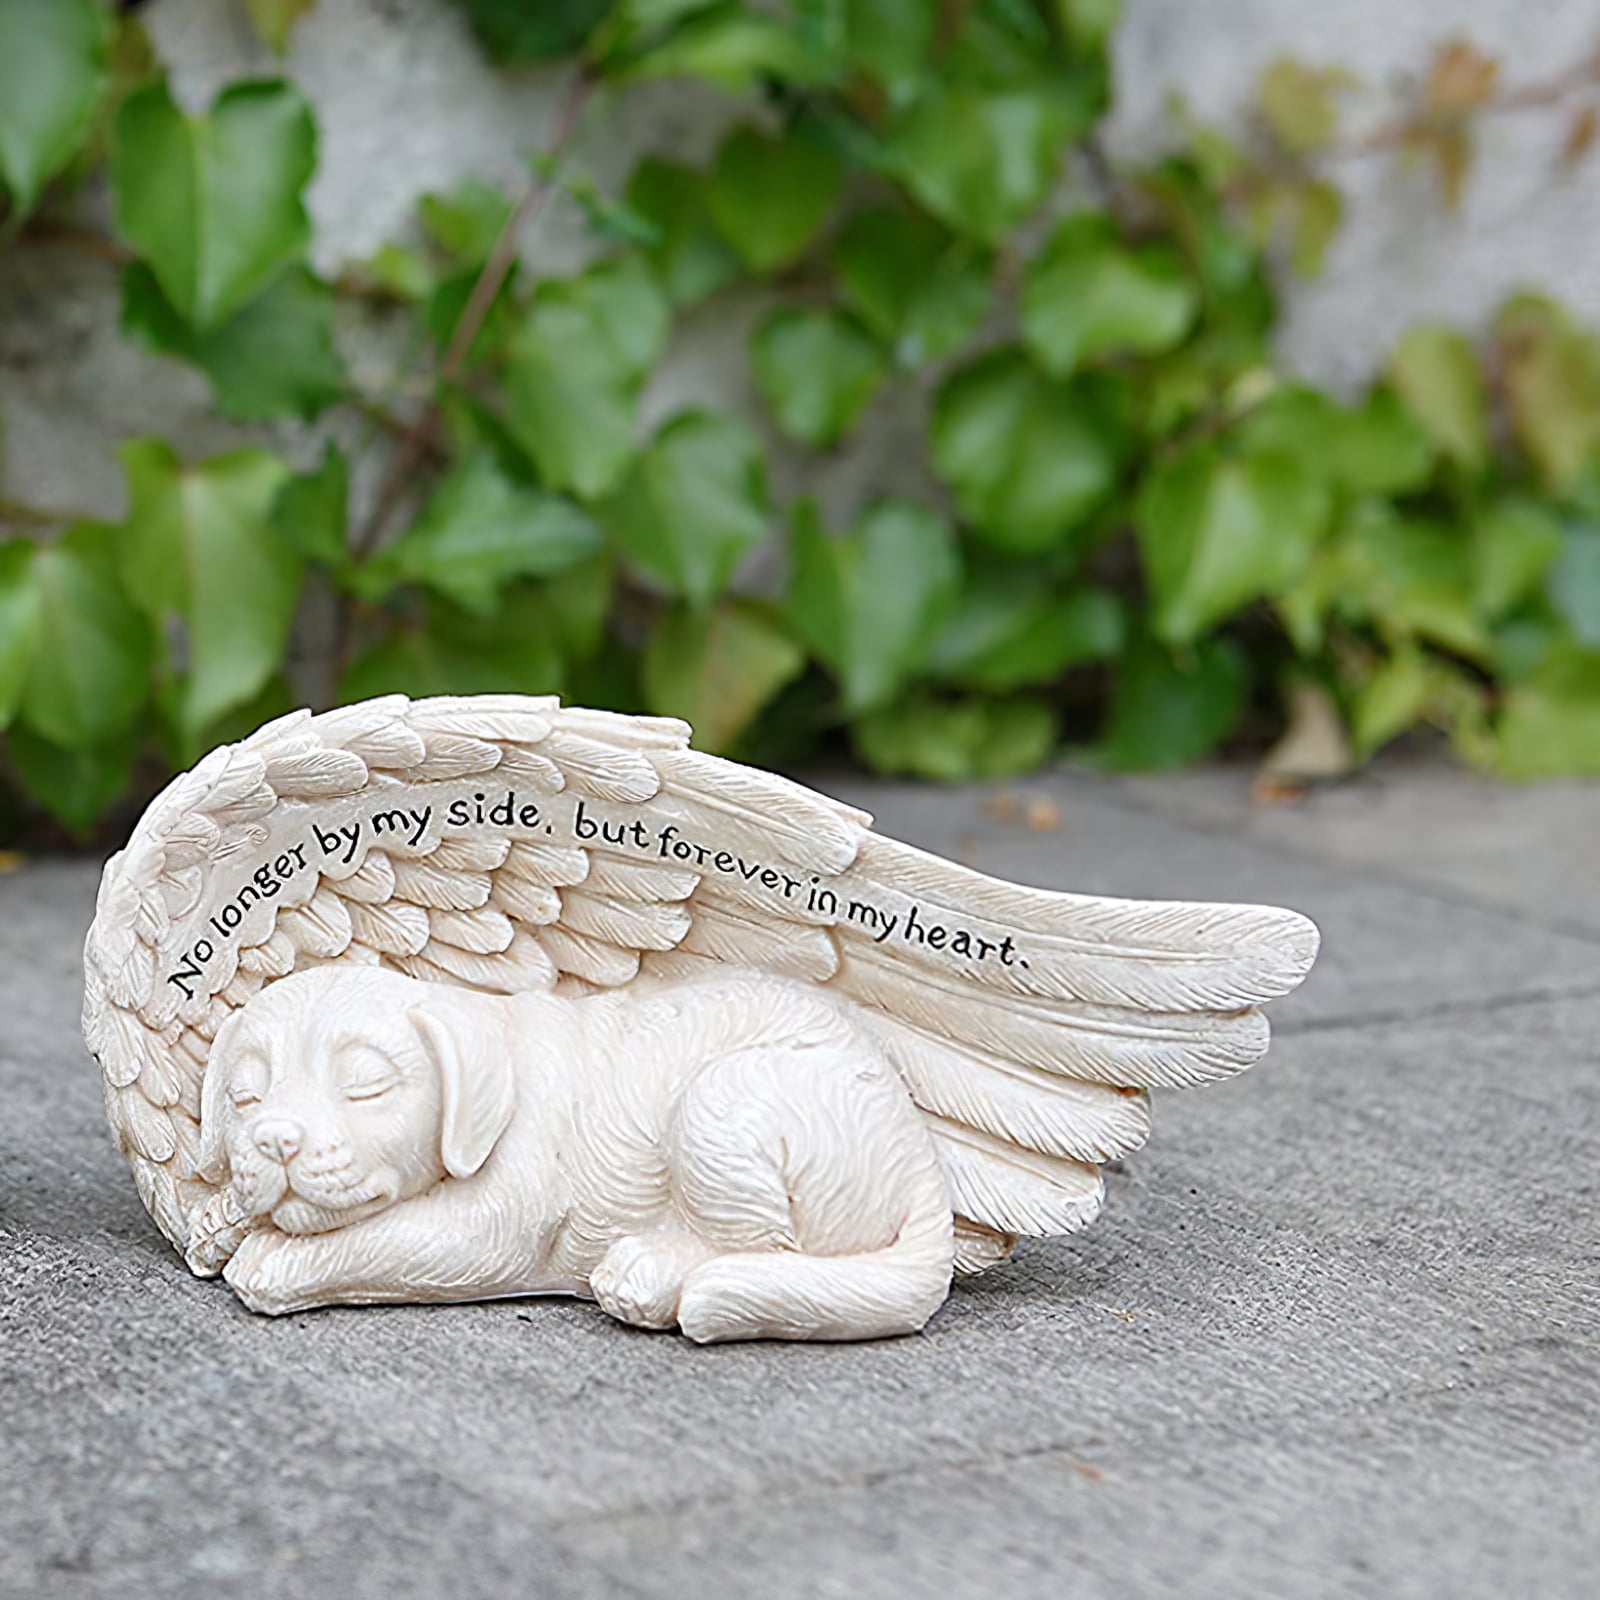 Resin Garden Dog Ornament Fadeless Sleep Angel Dog Realistic Pet Memorial Grave Marker Uv-resistant Angel Pet Sculpture Resin Memorial Dog Decoration With Angel Wing